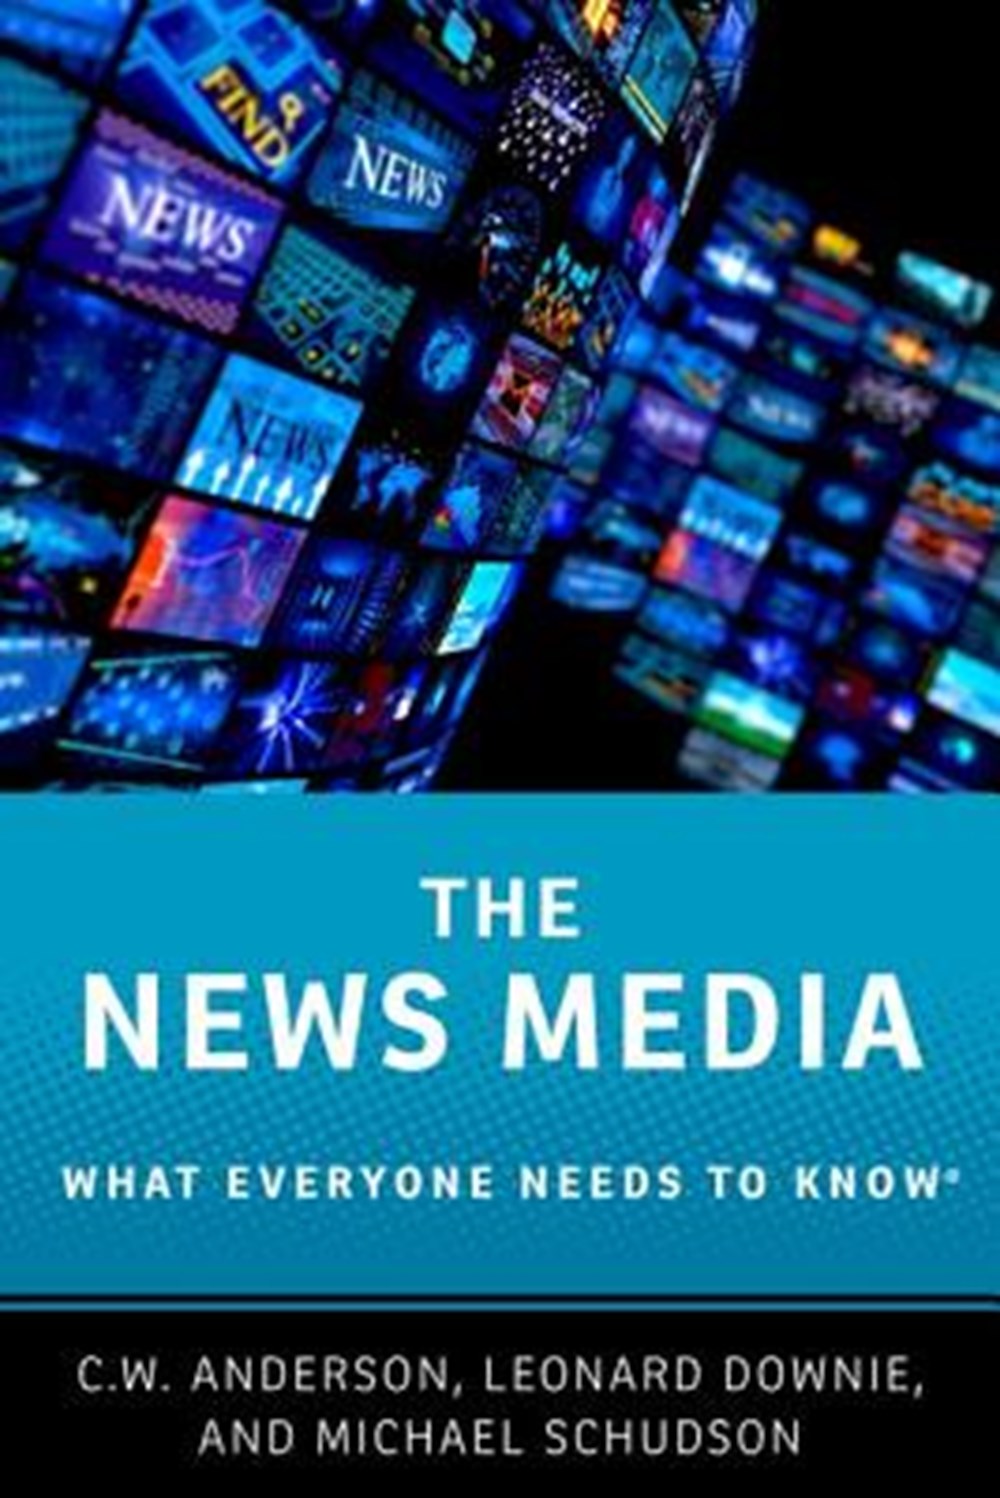 News Media What Everyone Needs to Know(r)